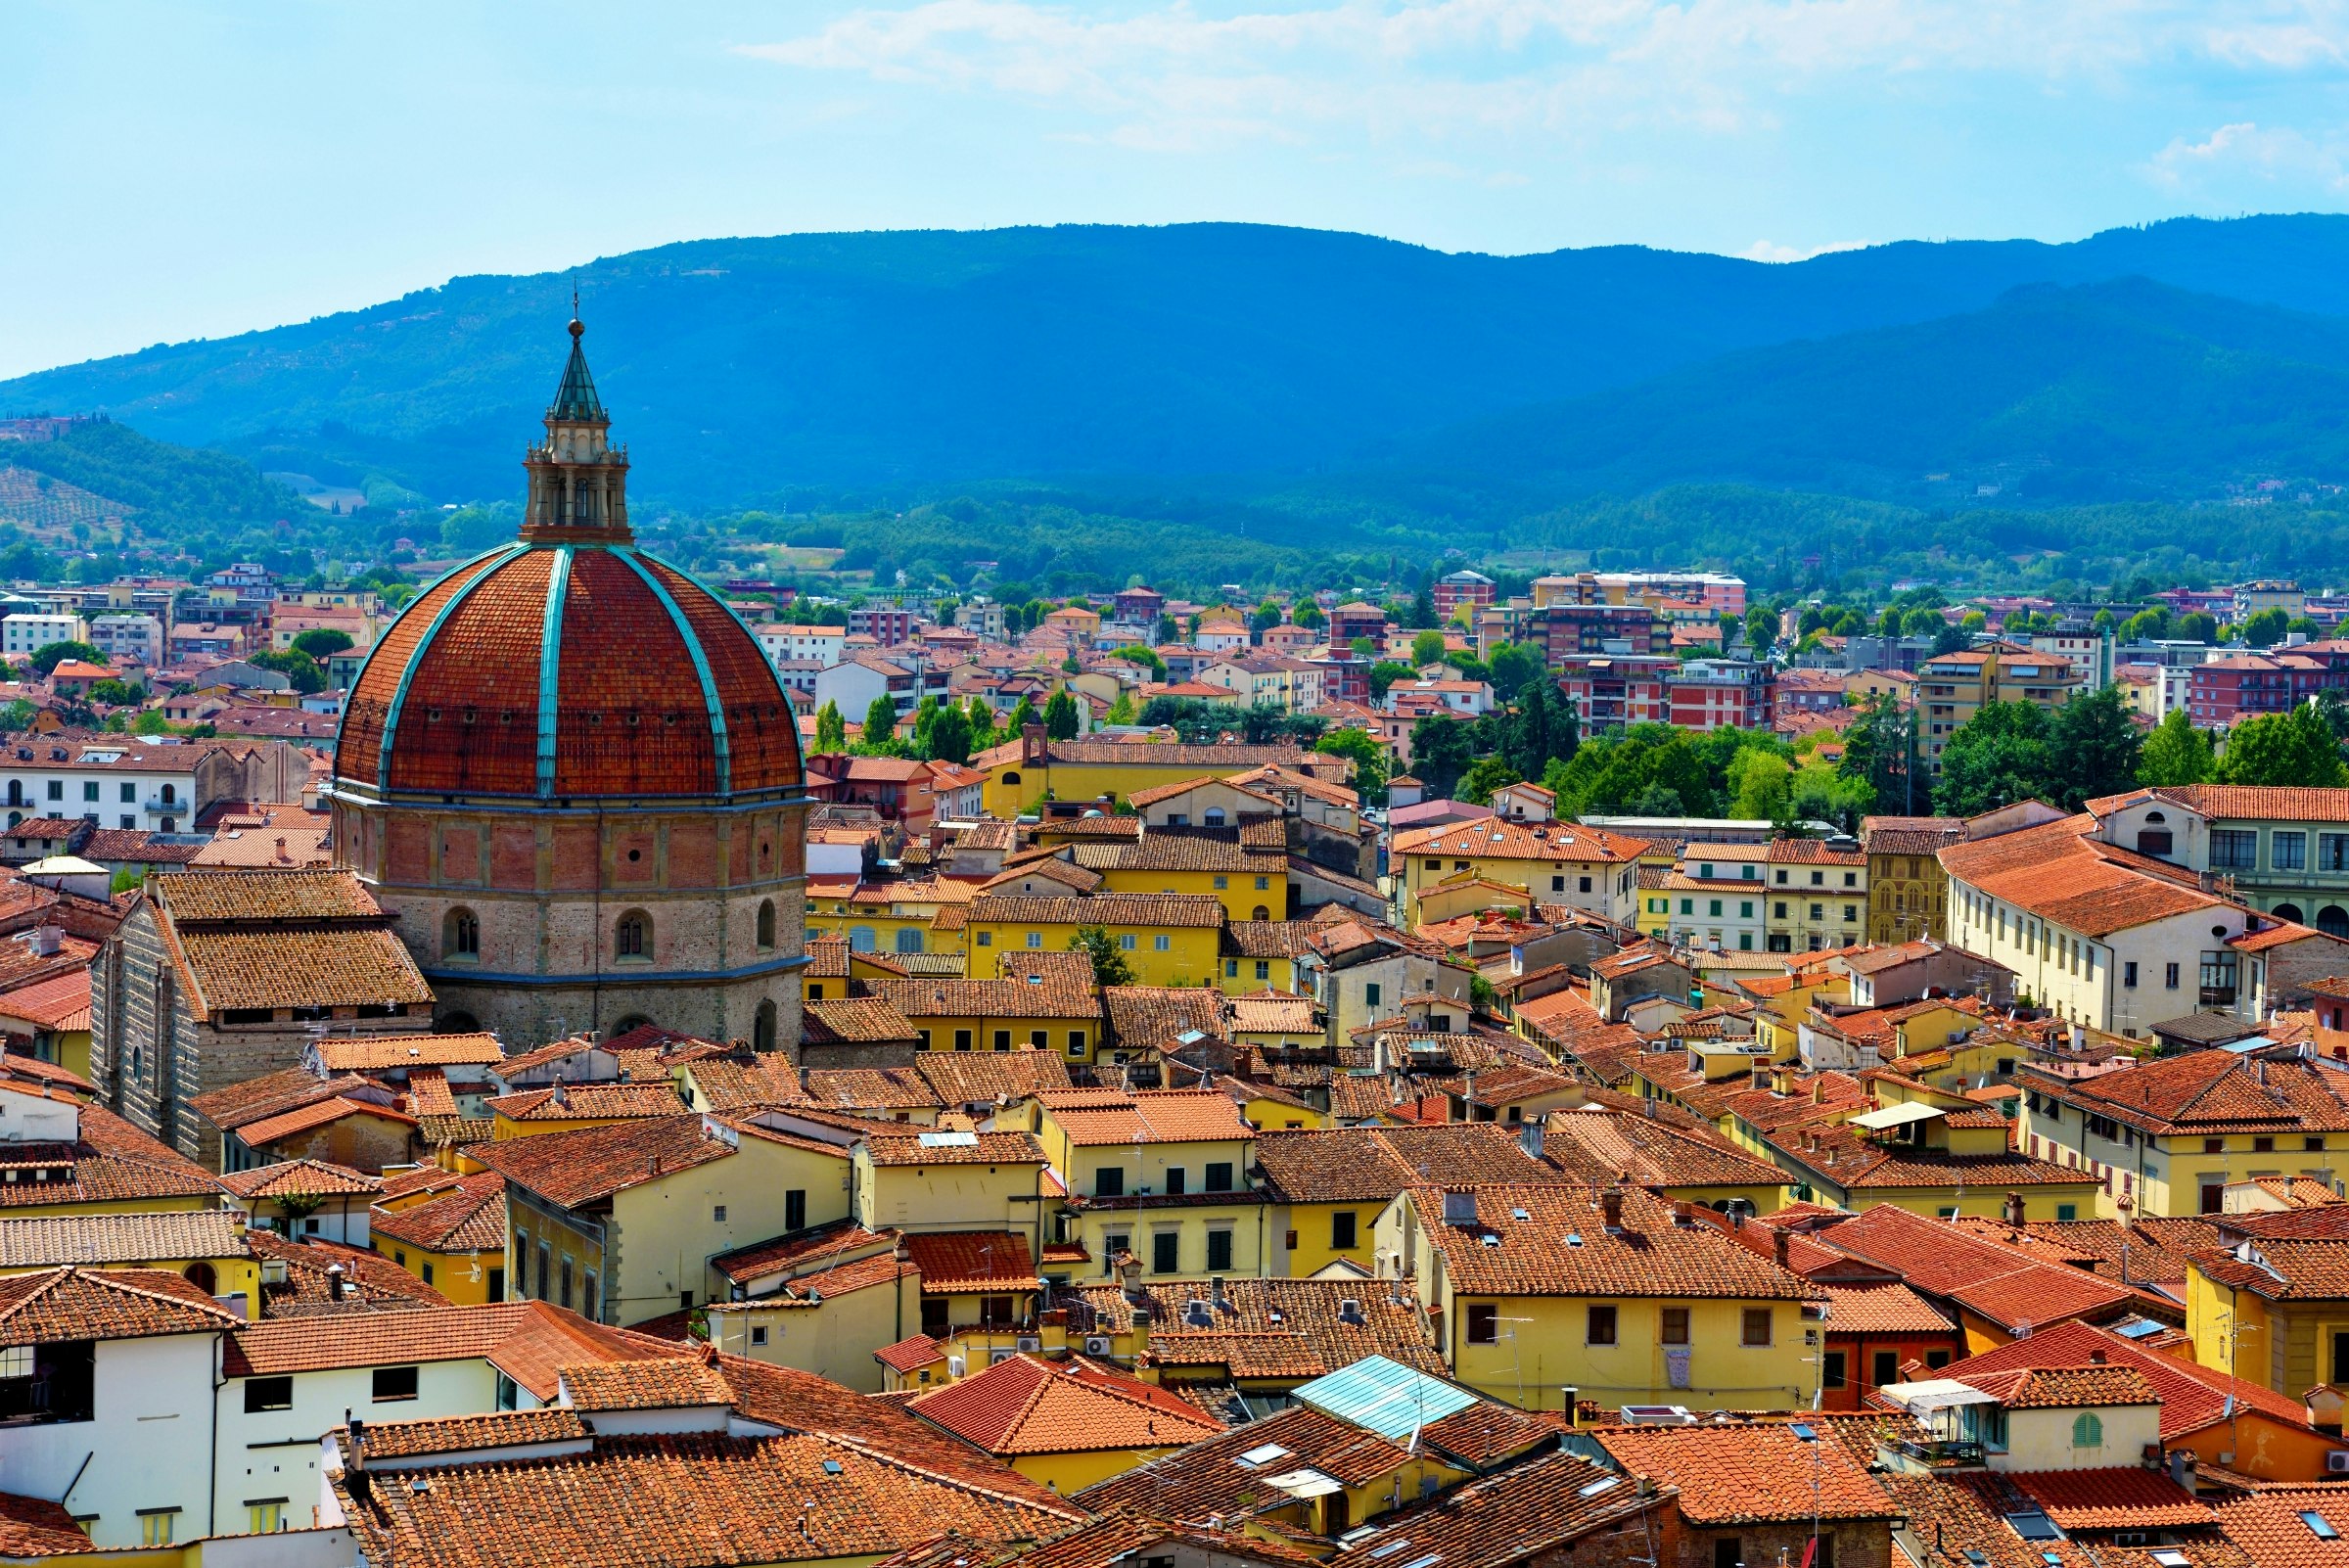 Panorama on top of the tower of the cathedral of Pistoia, Tuscany.